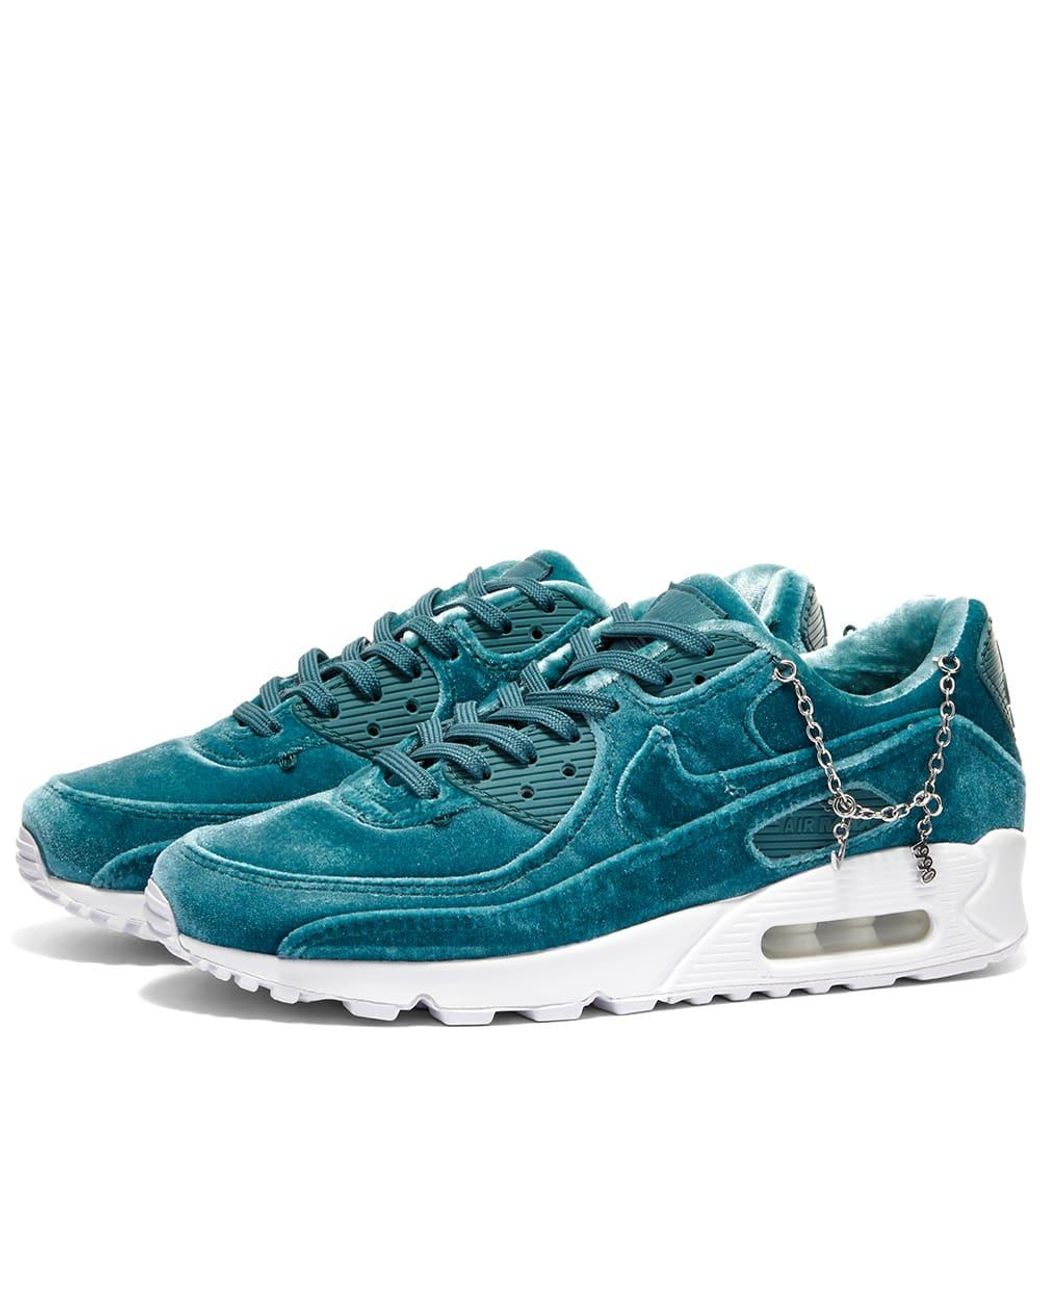 Nike Velvet W Air Max 90 Prm 'jewelry' Sneakers in Green/Silver/White  (Green) | Lyst Canada